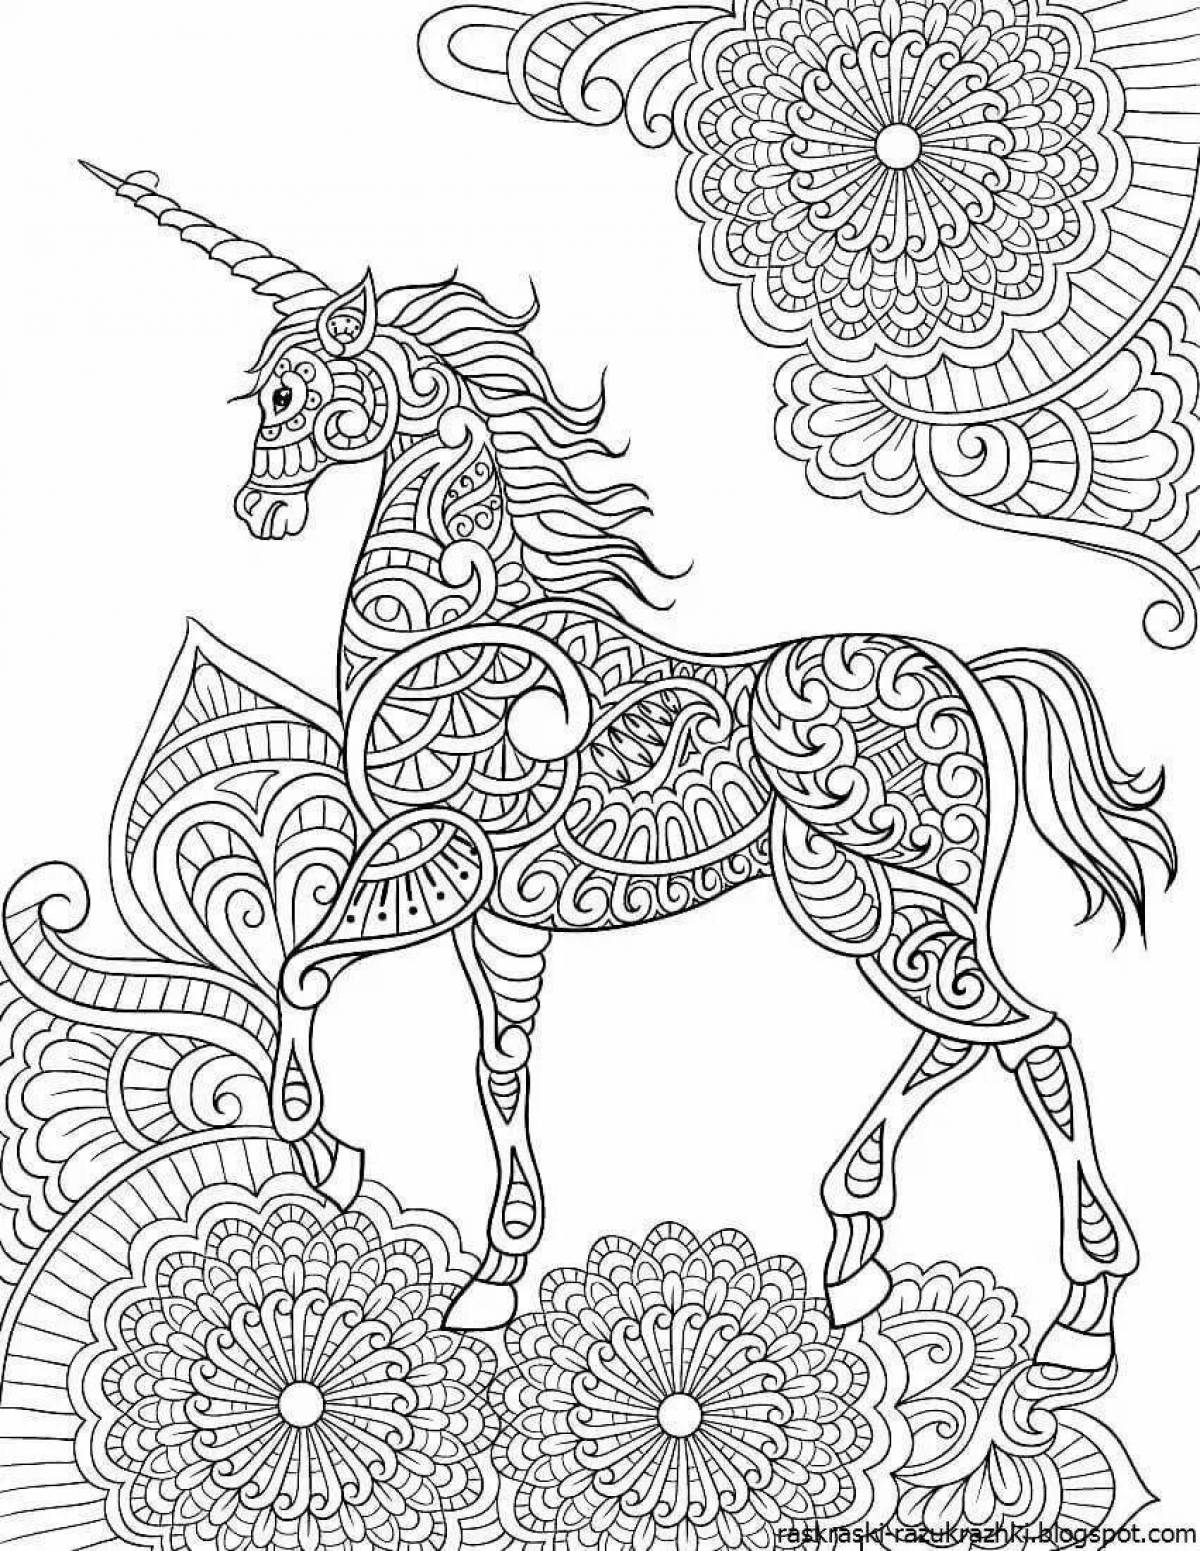 Adorable coloring book with small patterns